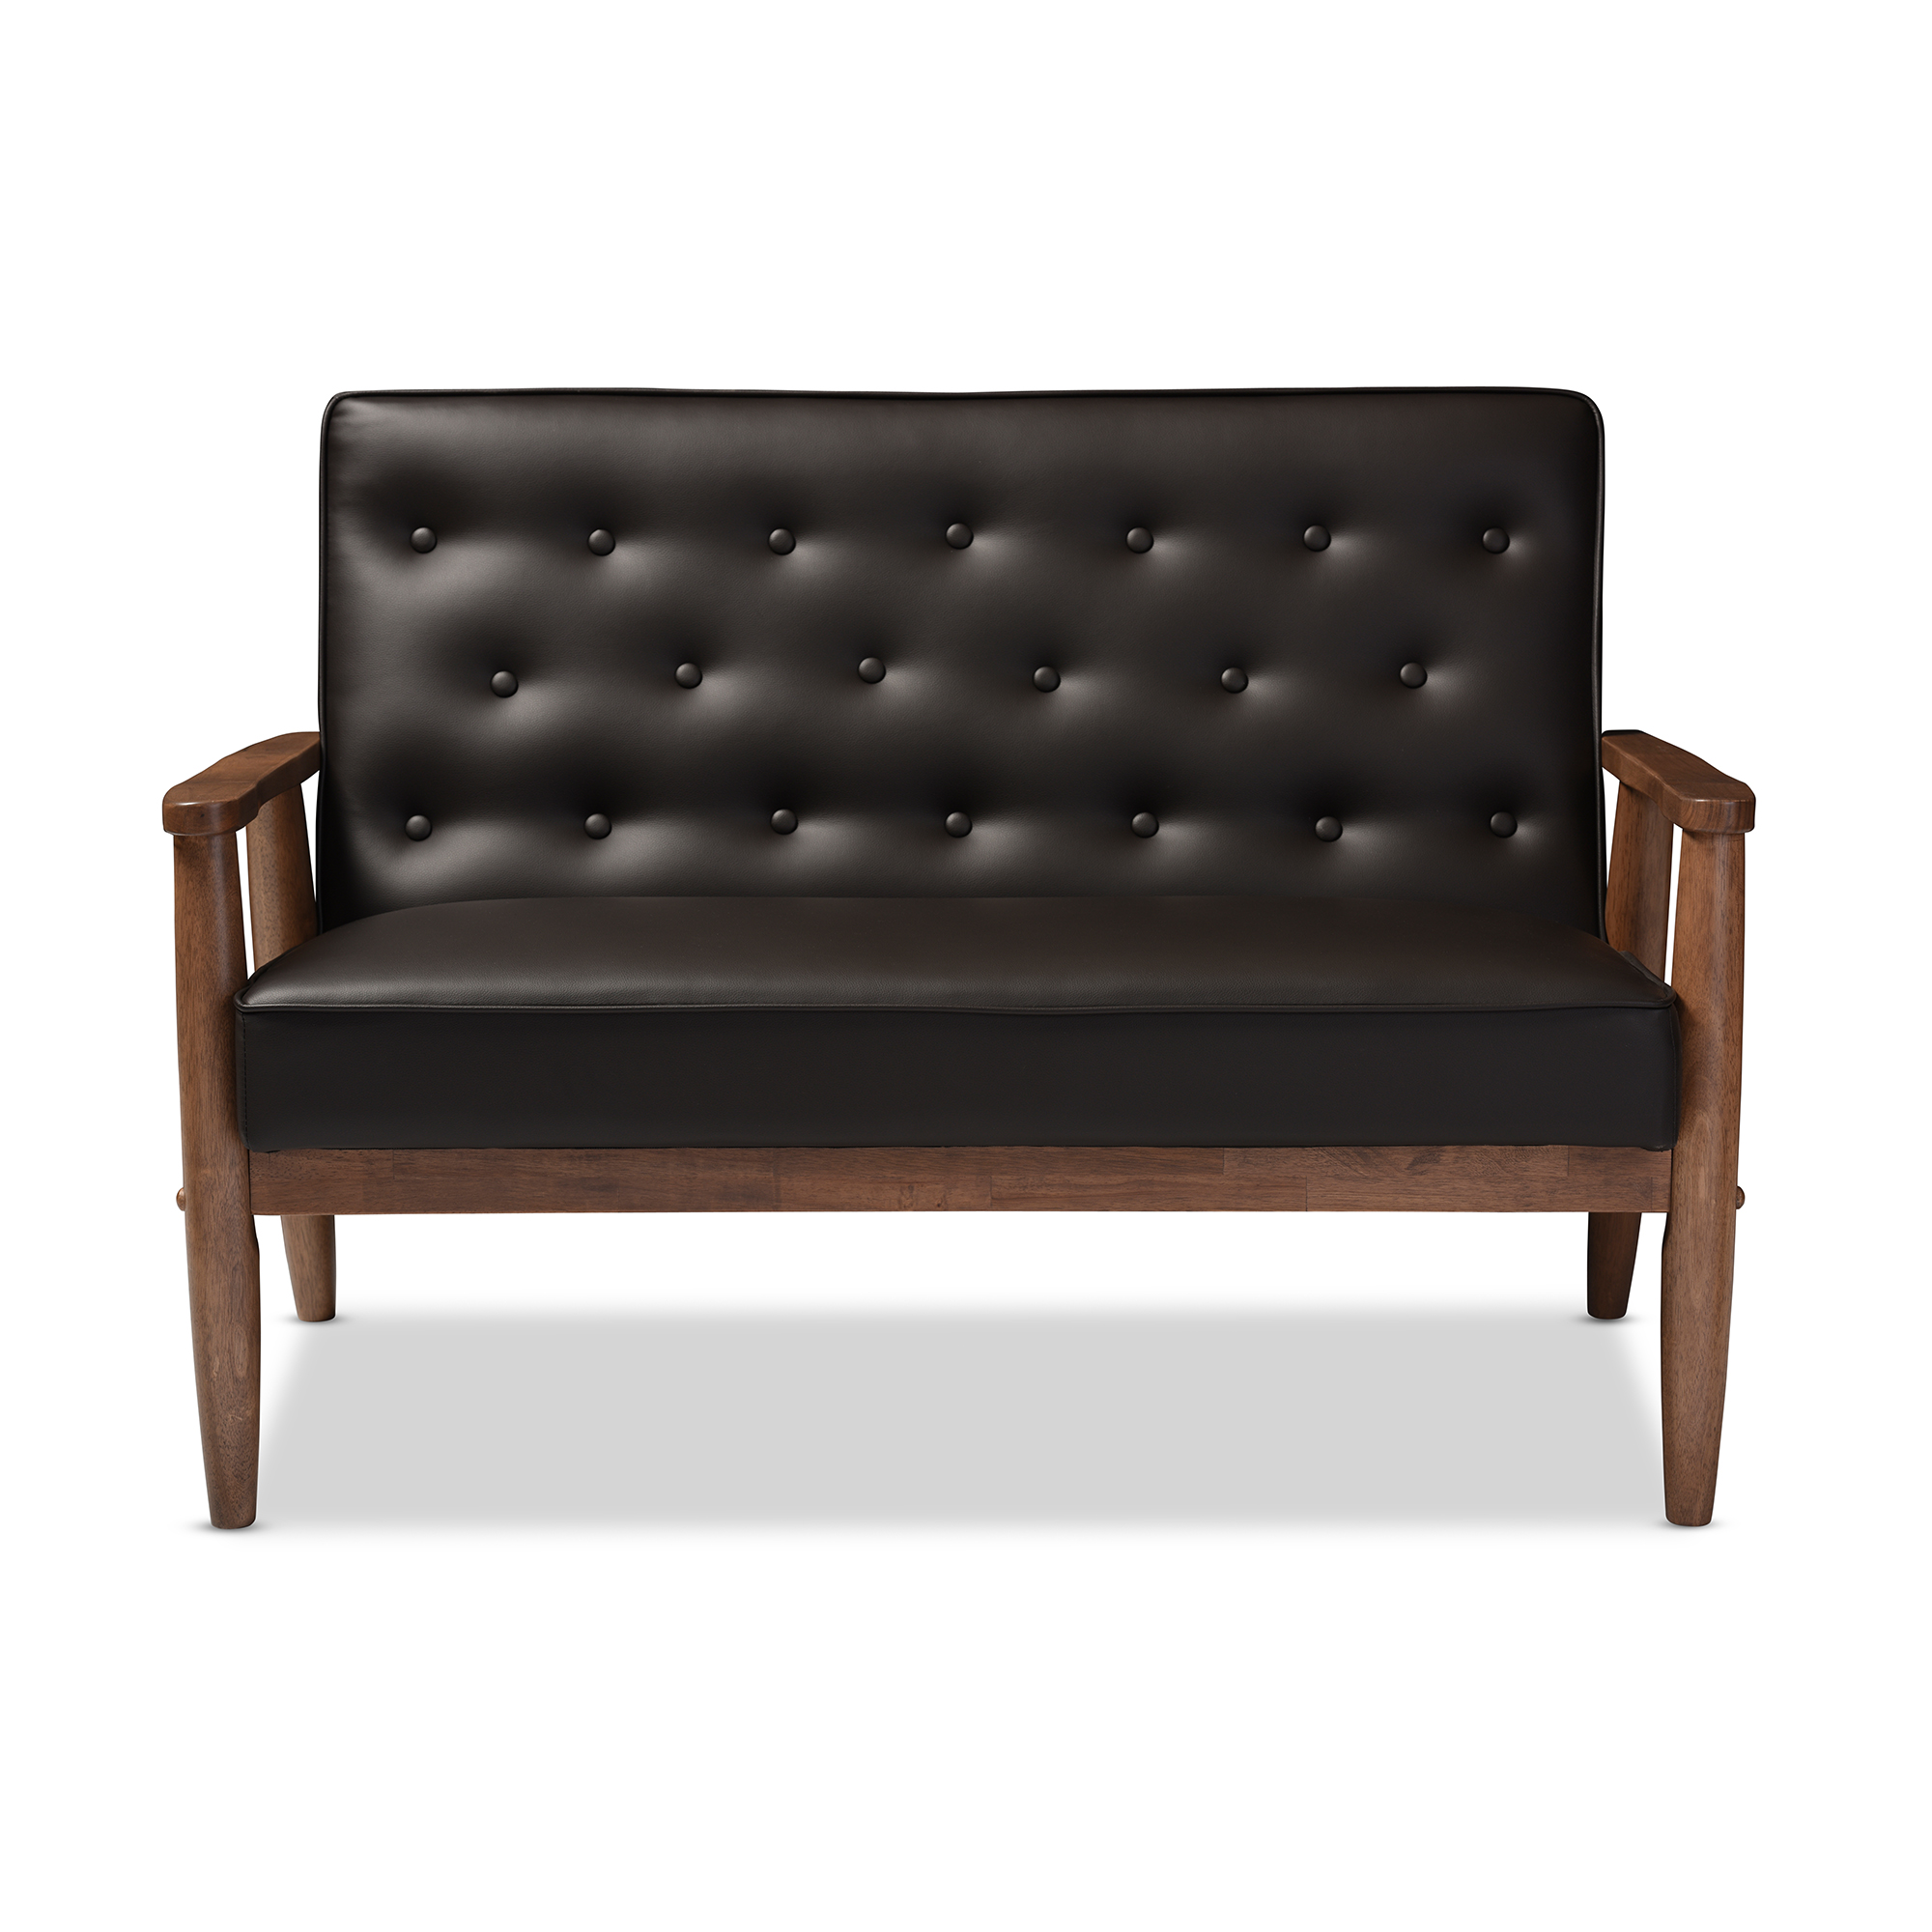 Baxton Studio Sorrento Mid-century Retro Modern Brown Faux Leather Upholstered Wooden 2-seater Loveseat